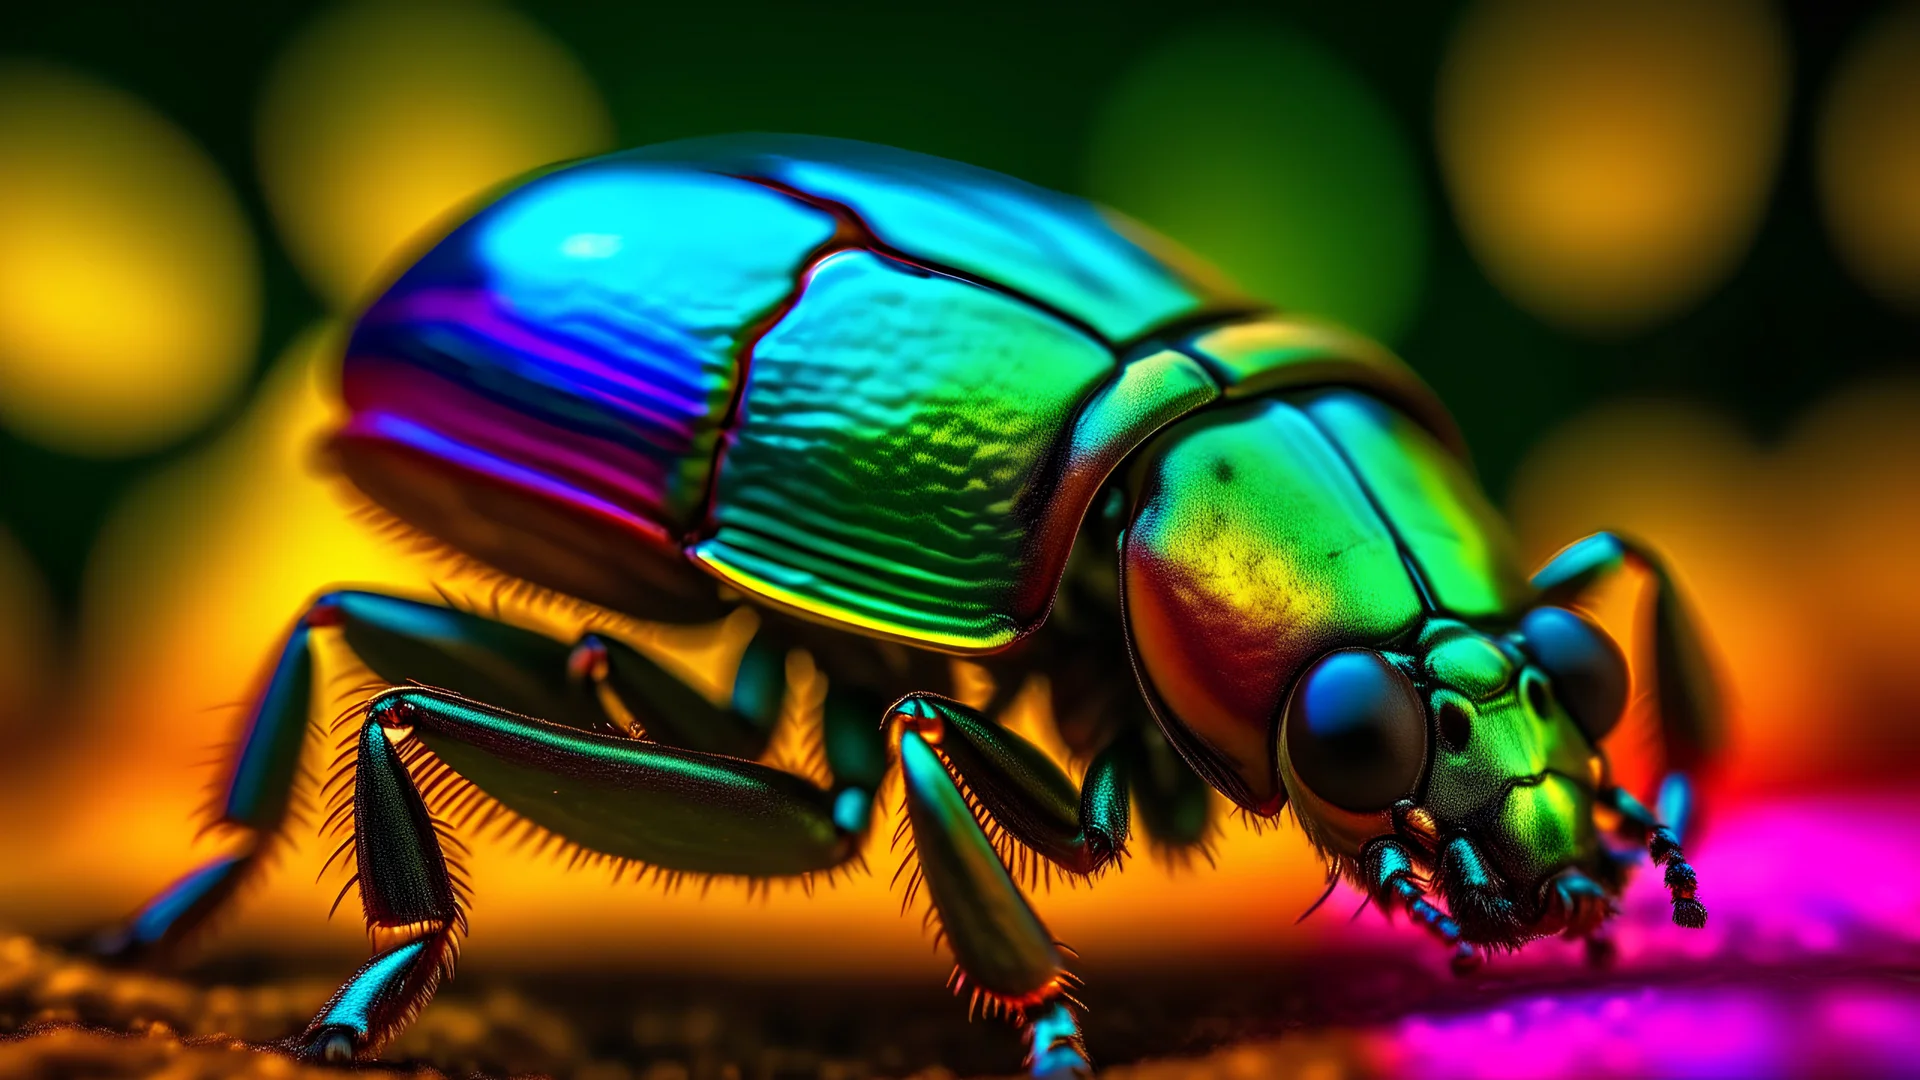 A close-up view of a beetle's iridescent shell, reflecting the vibrant colors of a tropical sunset.